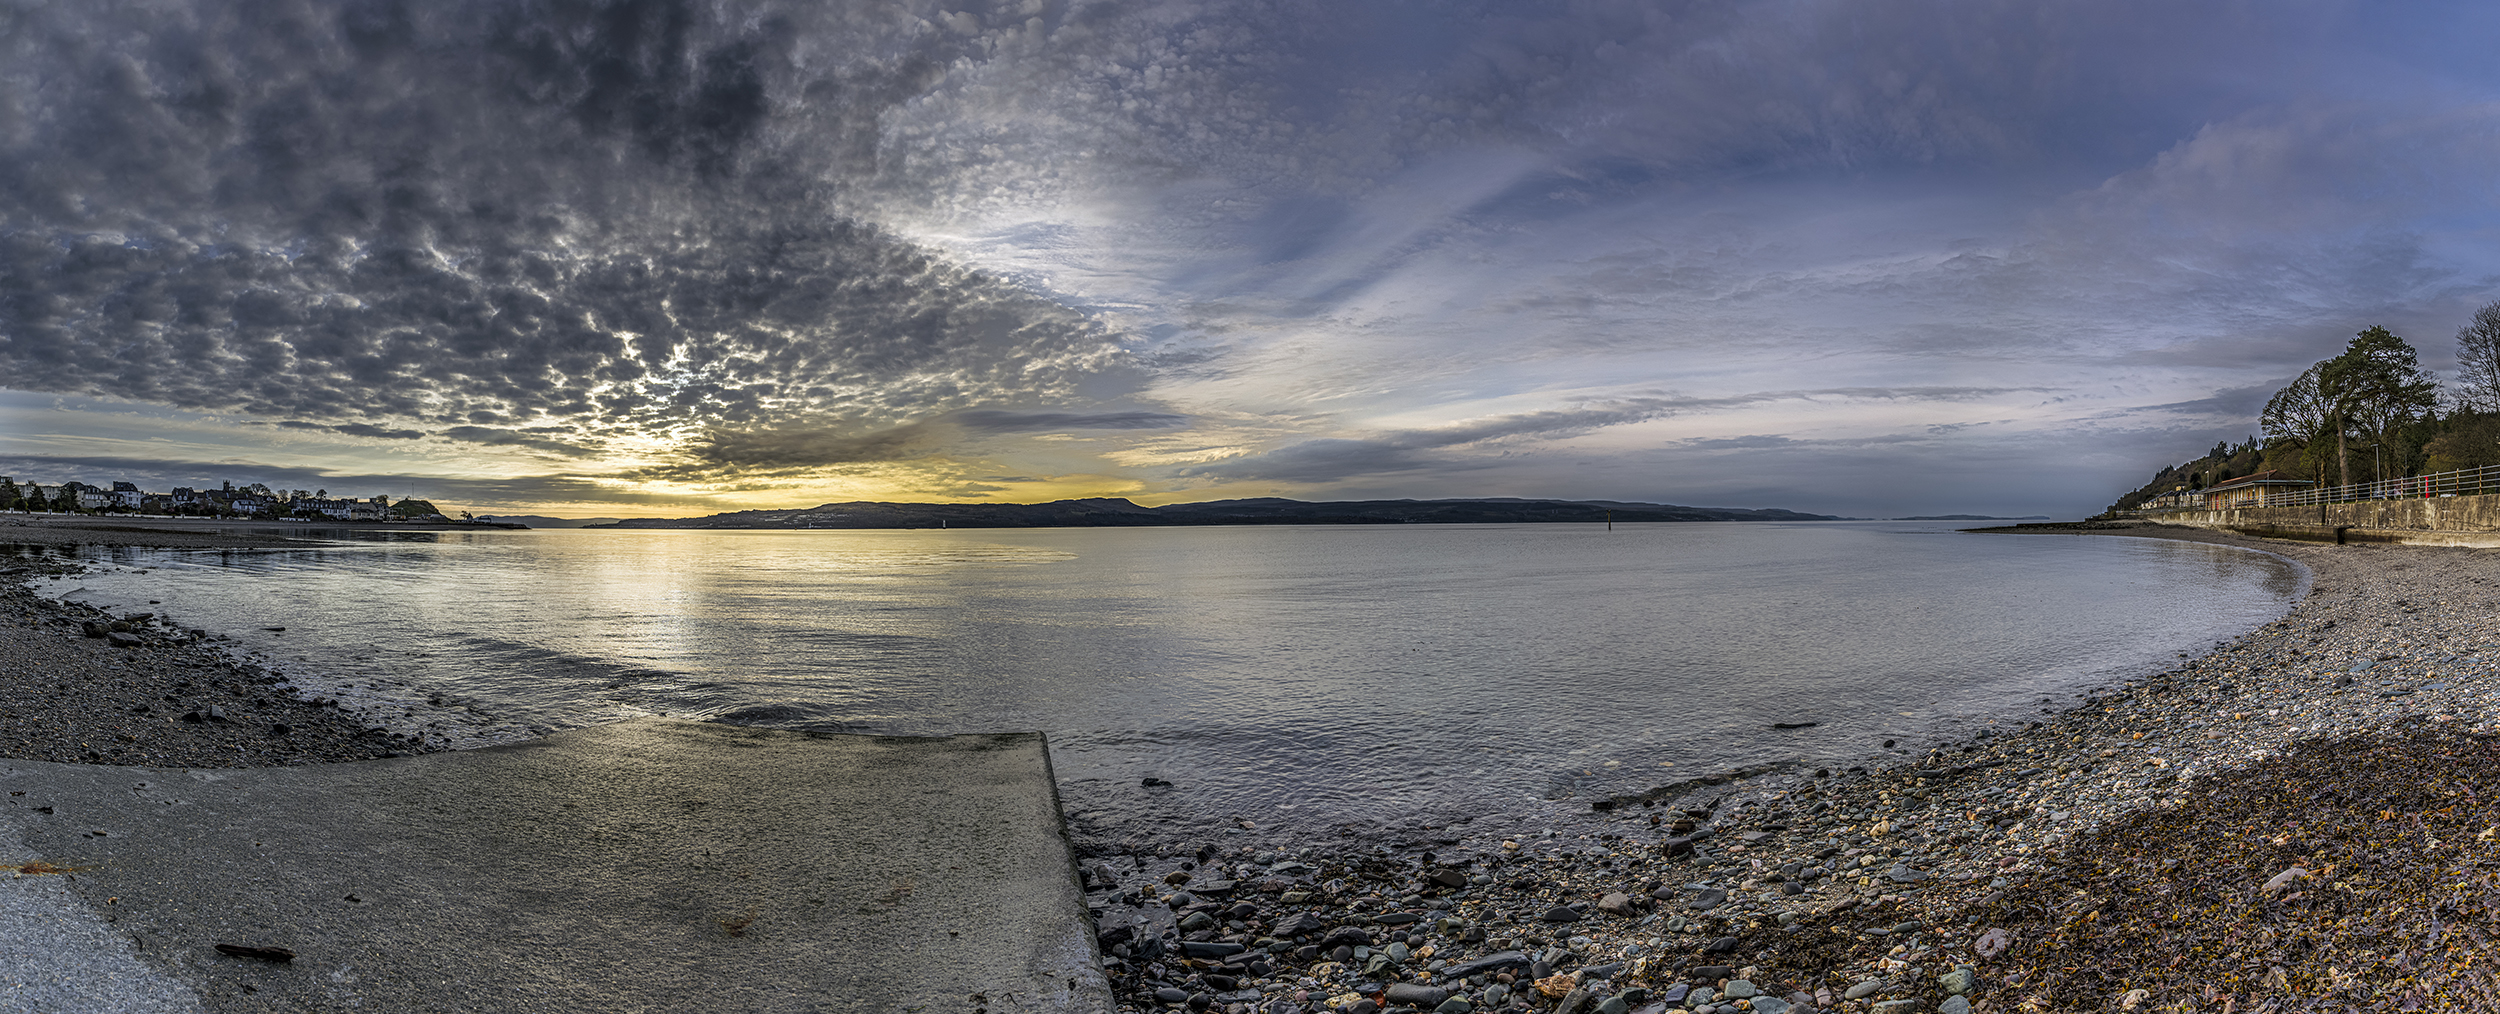 sunrise over the Firth of Clyde from Dunoon